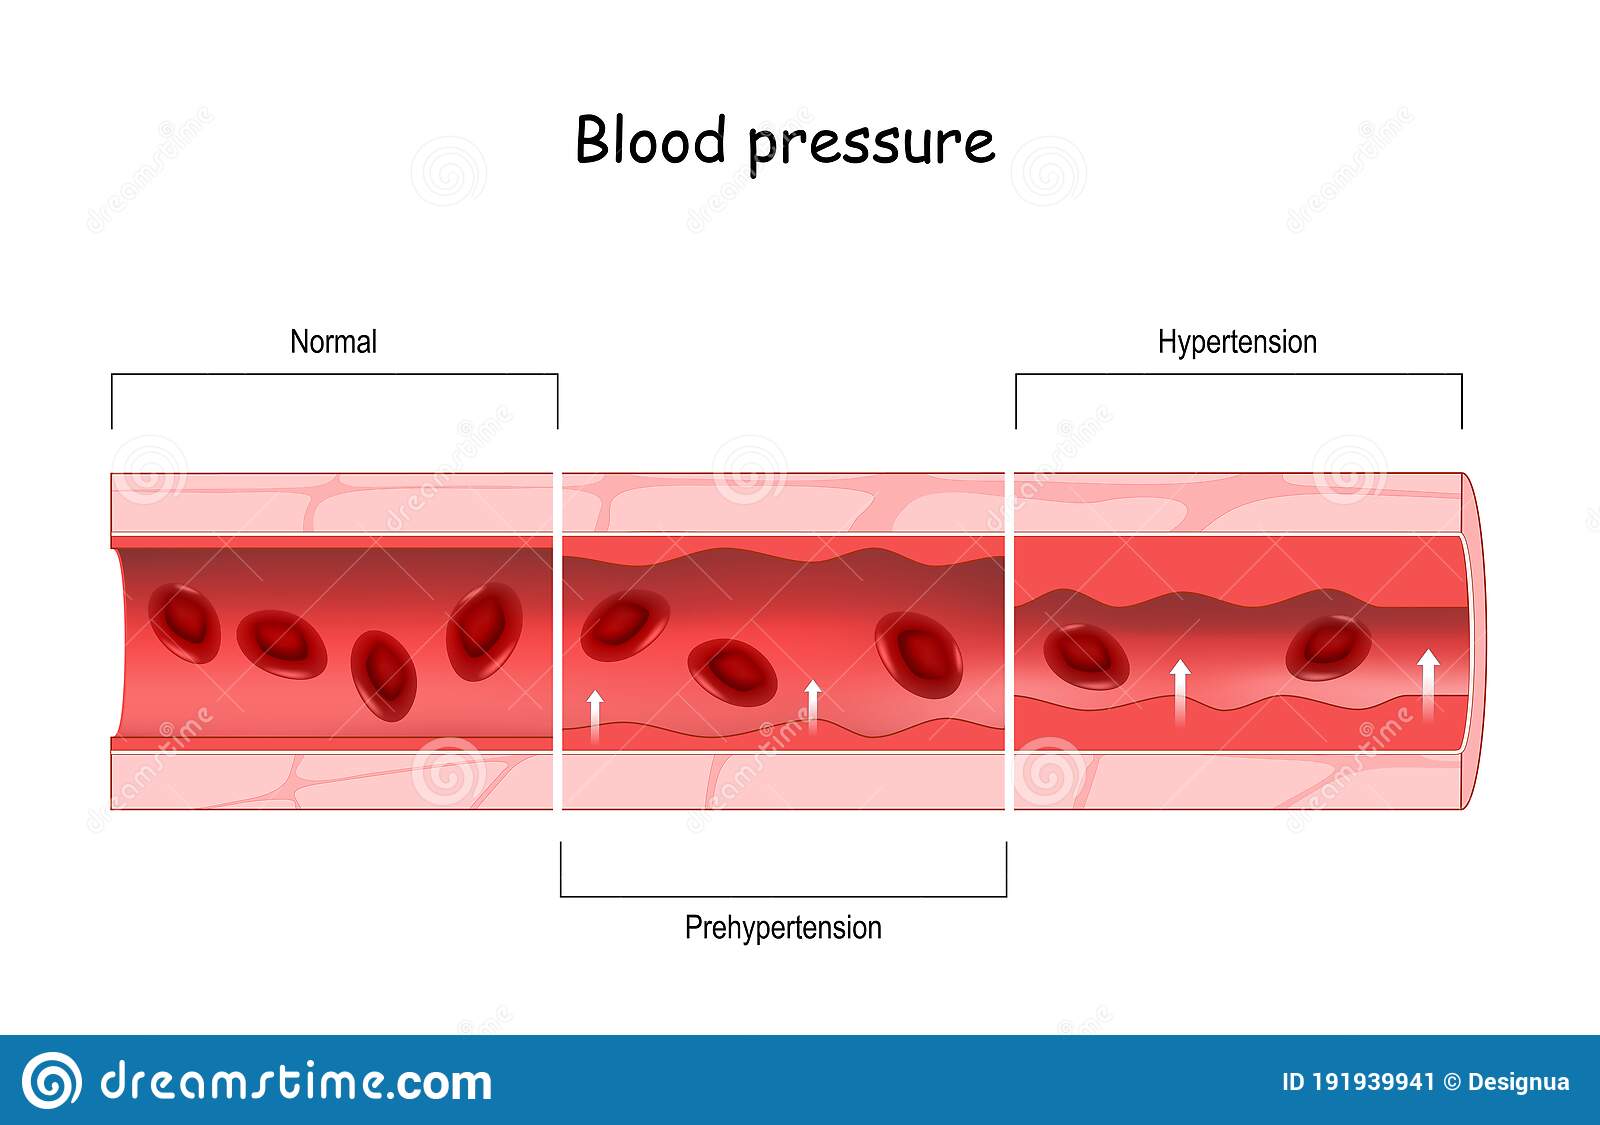 What is the vessel with the highest blood pressure?